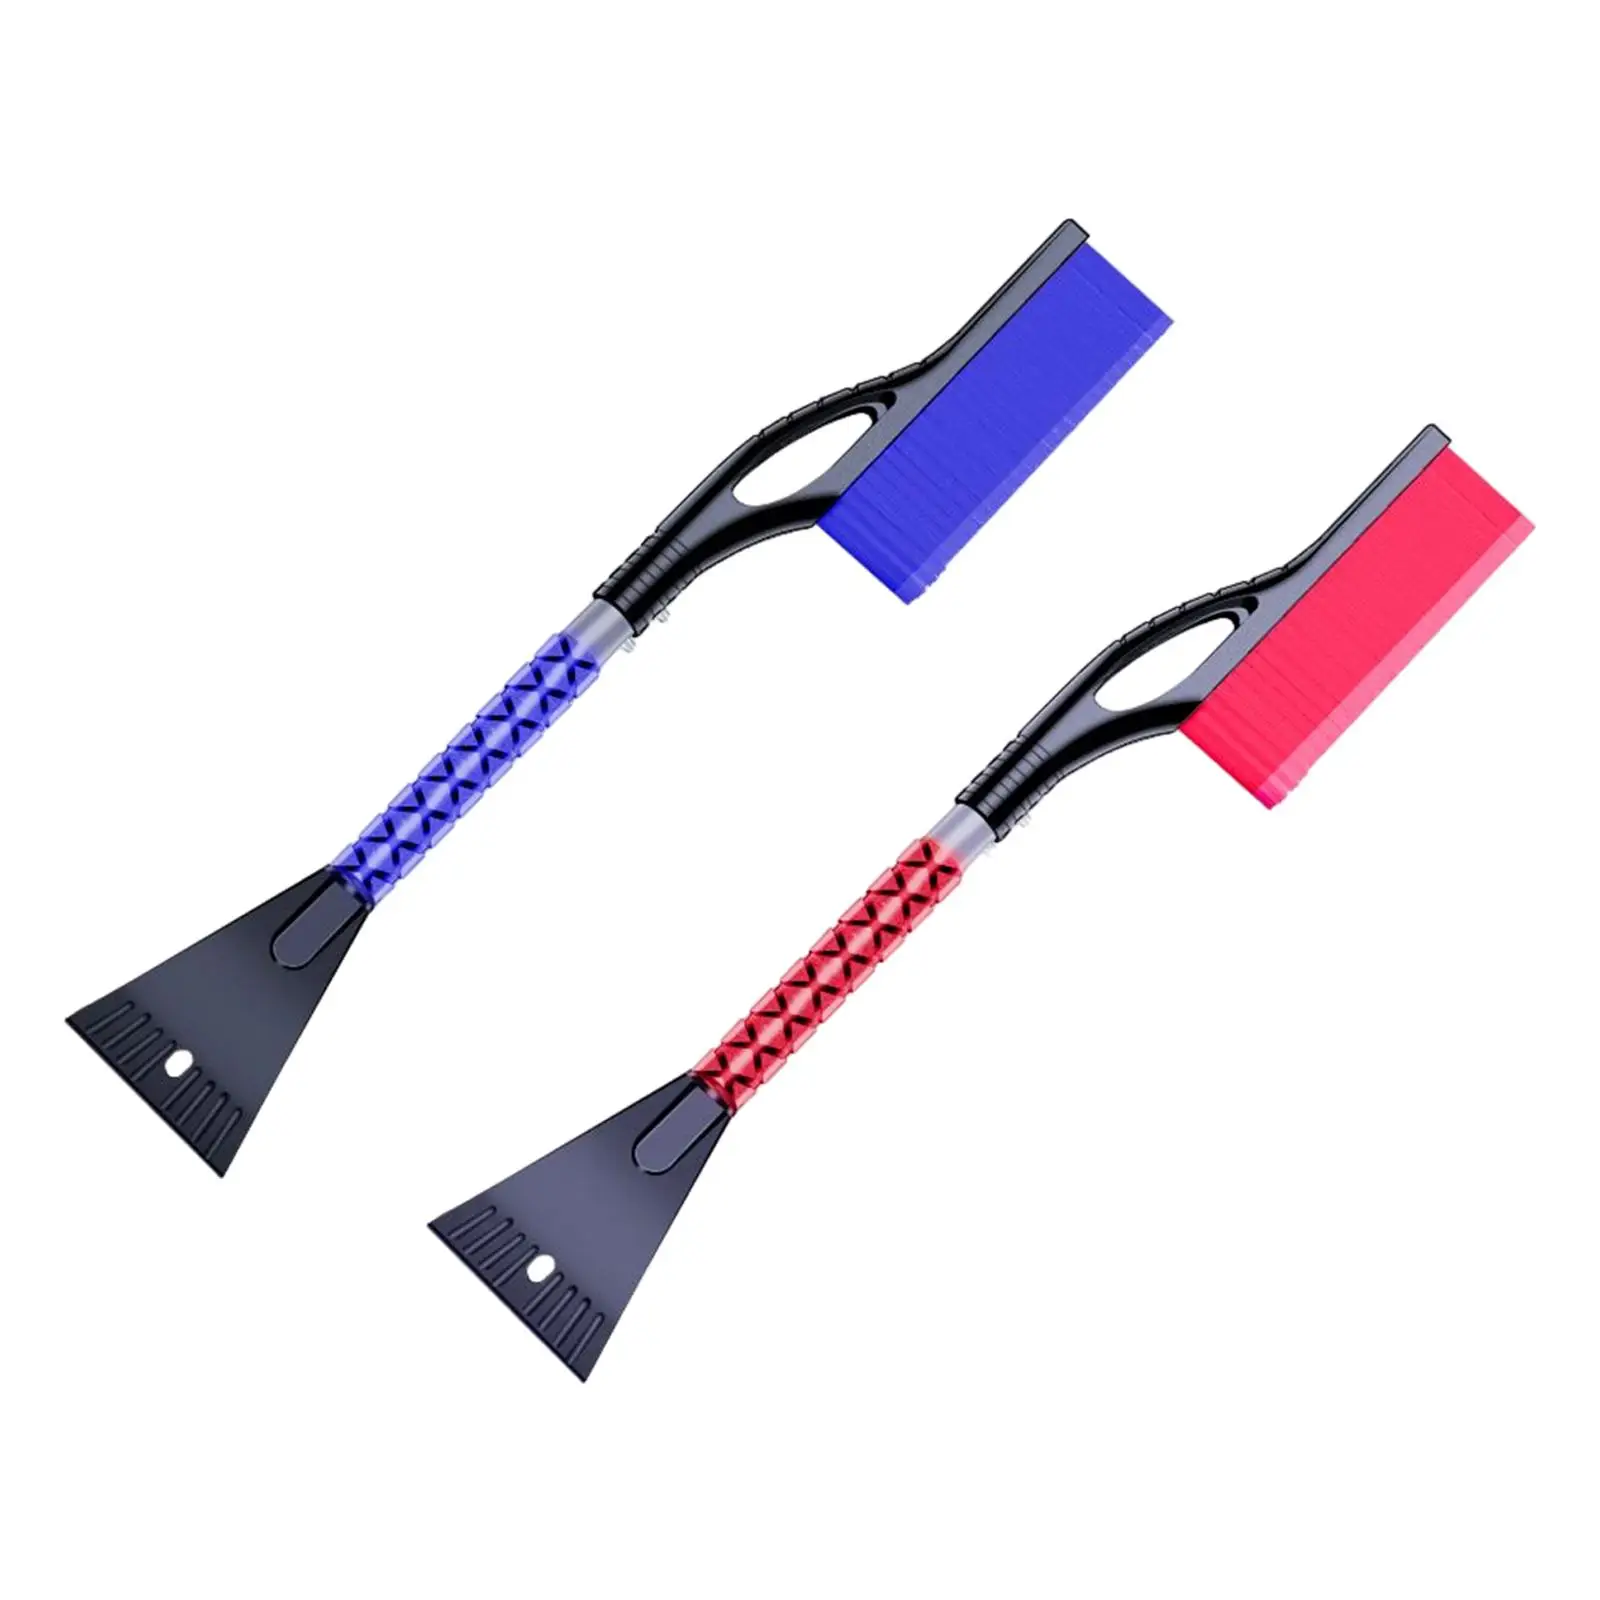 Snow Brush & Snow Shovel Portable with Grip Snowbrush Snow Remover Set for Car Windshield Auto SUV Camping Beach